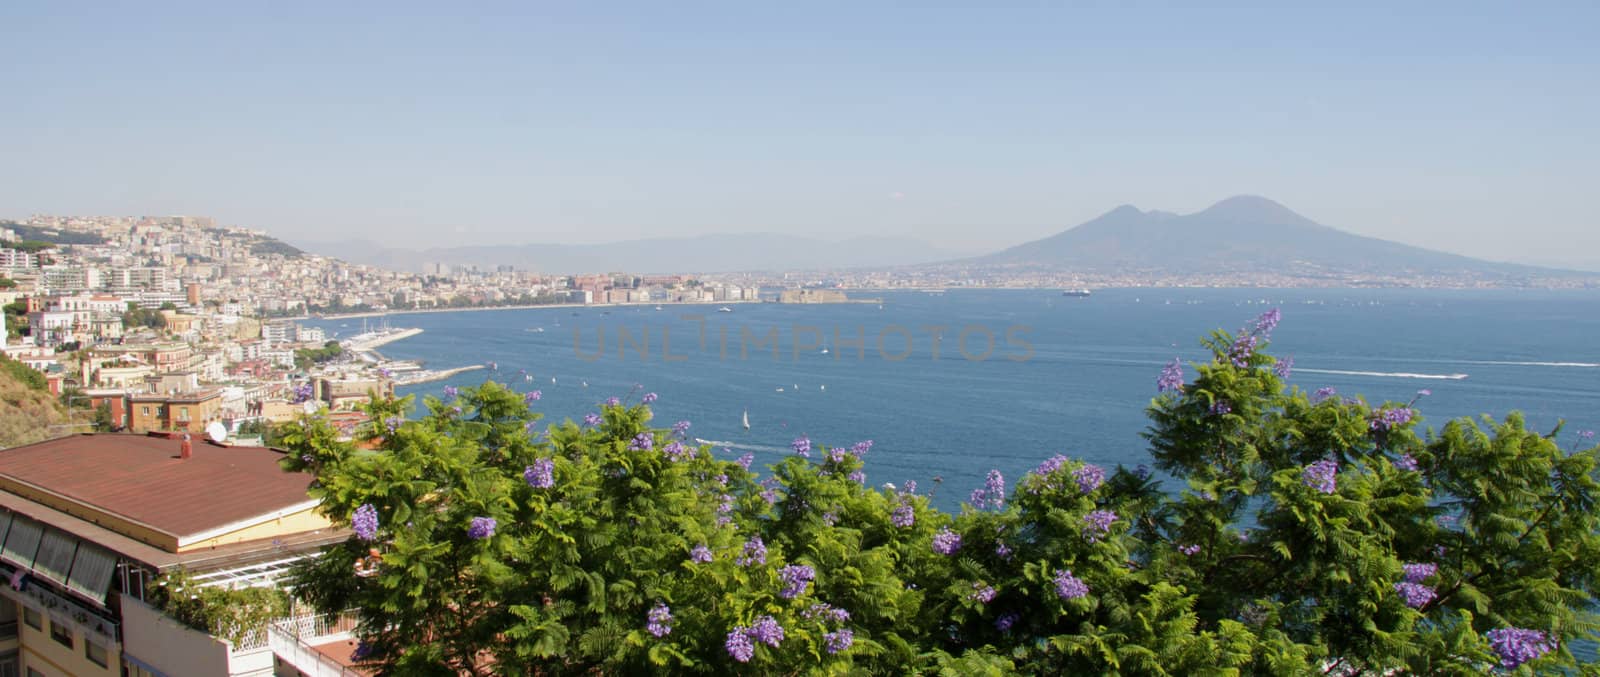 The spectacular bay of Naples, with the ominous and still active (volcano) Mount Vesuvius in the background.
